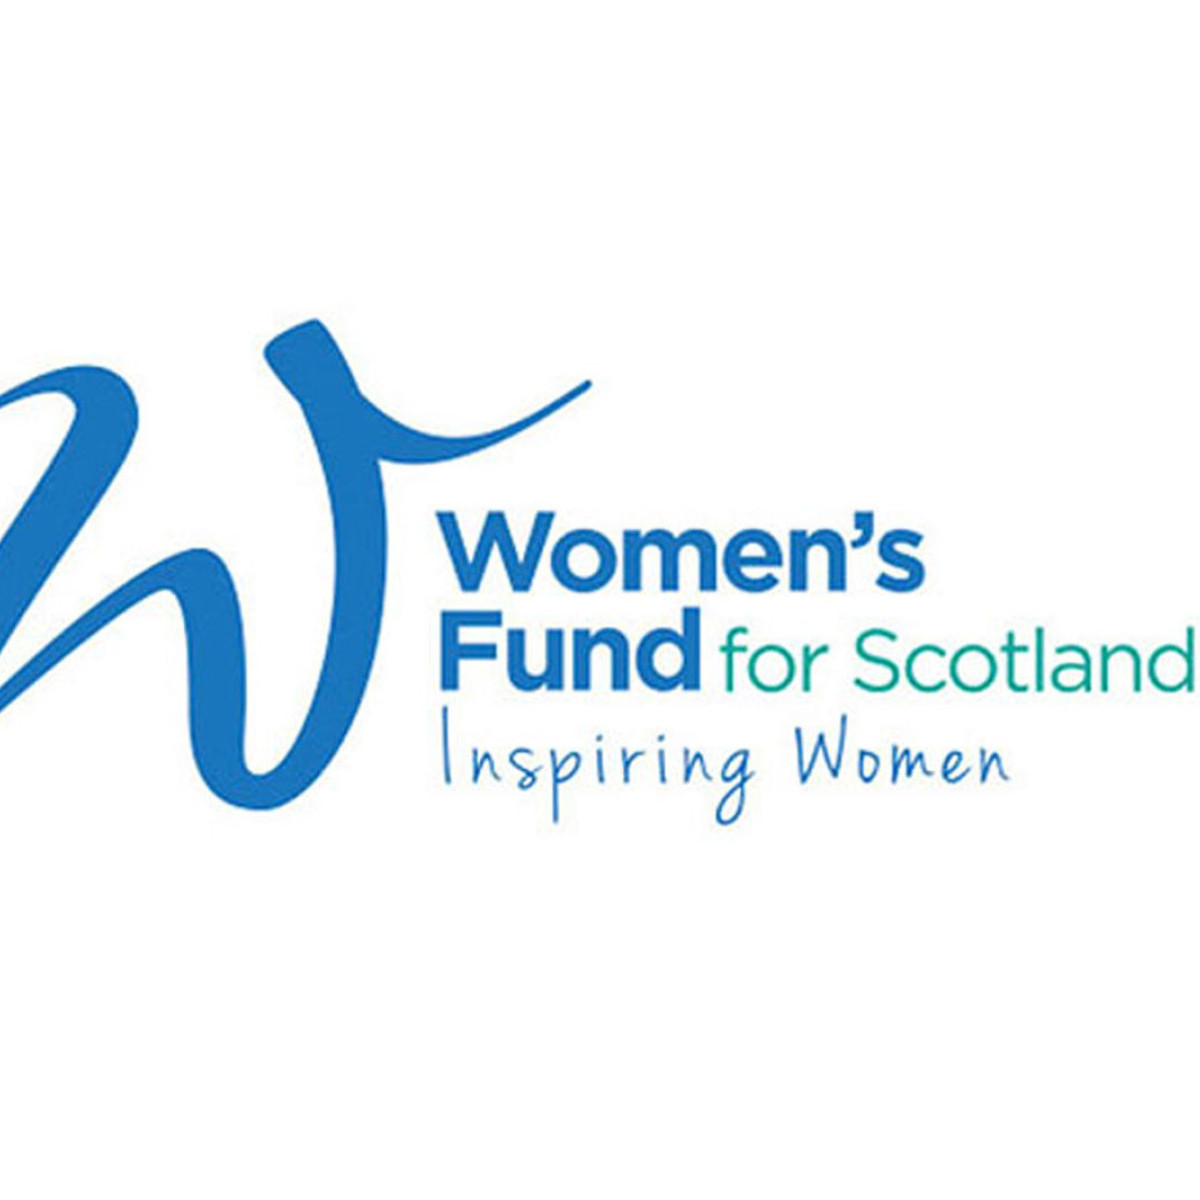 SWAN has received a grant from the Women’s Fund Scotland Cover image